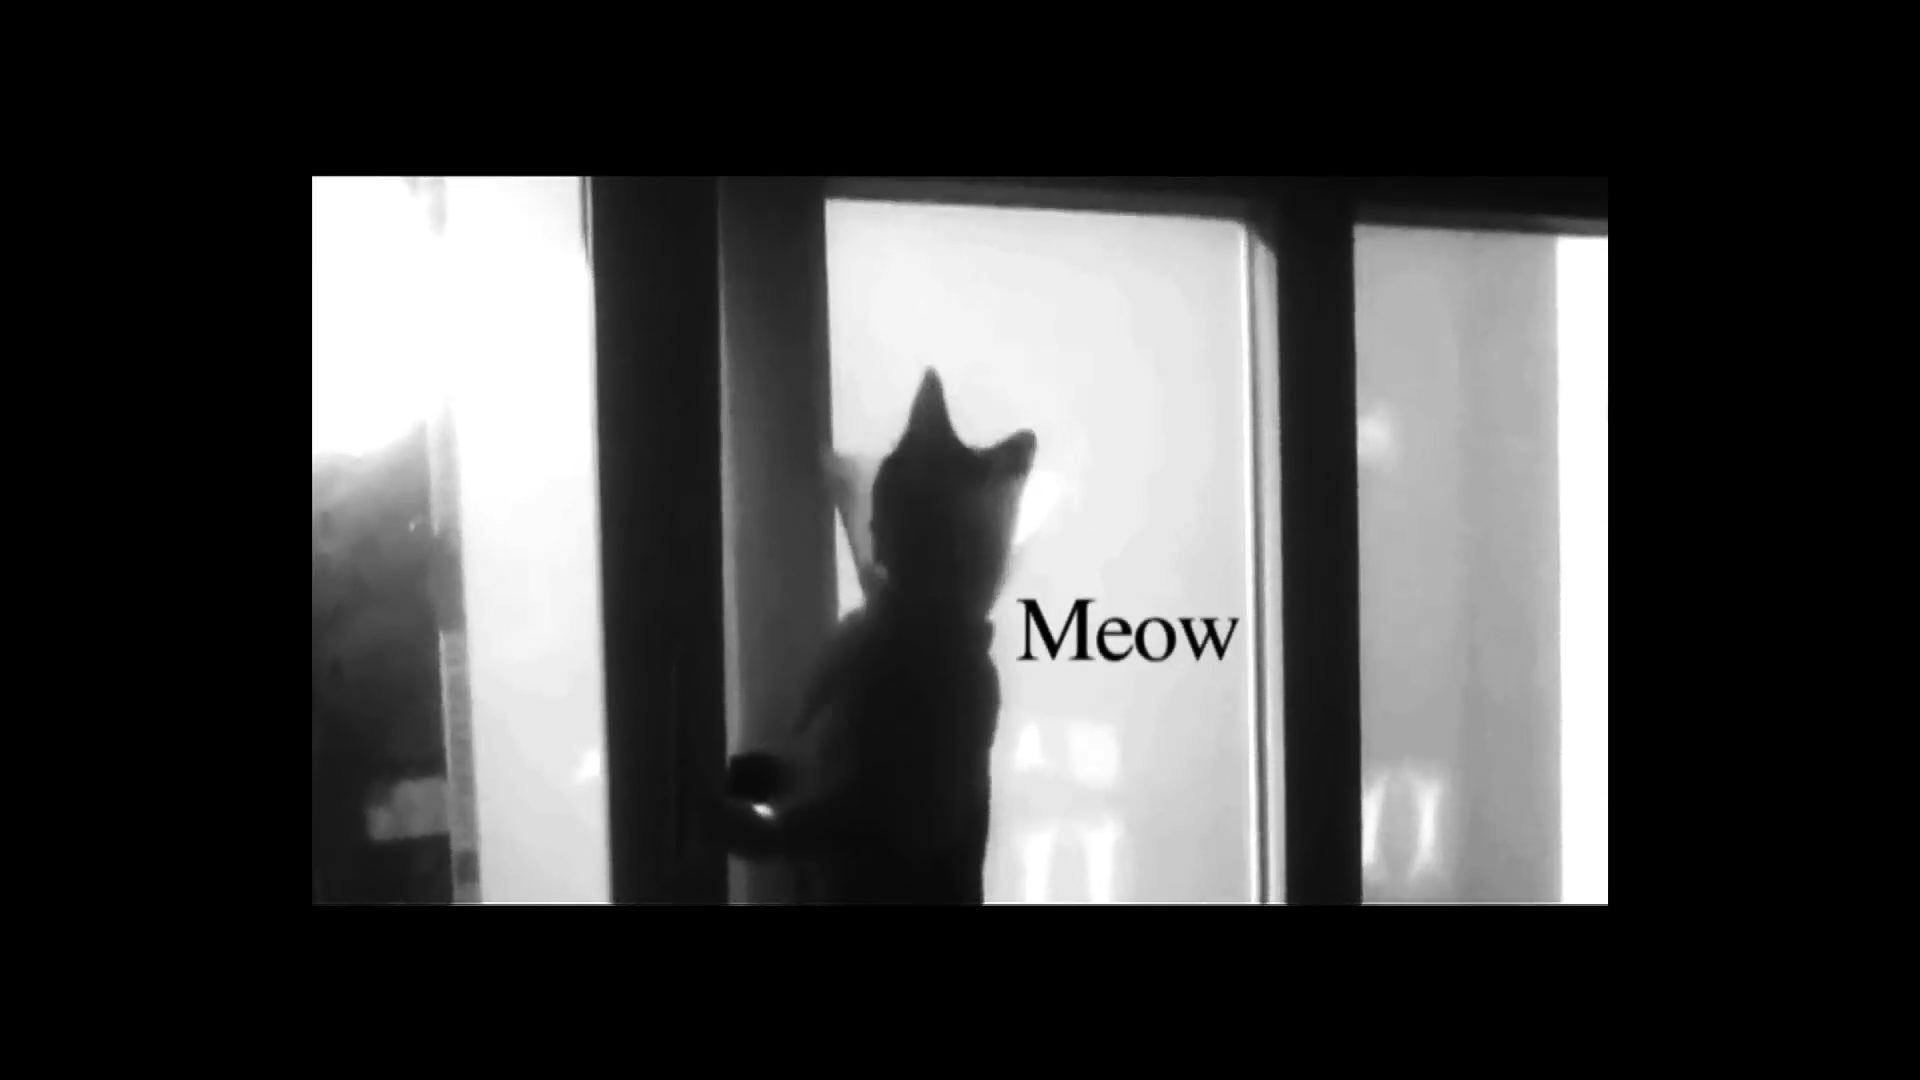 Image still from a video. A black cat sits in the middle of a window frame, its back facing the camera. Black text across the image reads, “Meow,” just to the right of the cat.